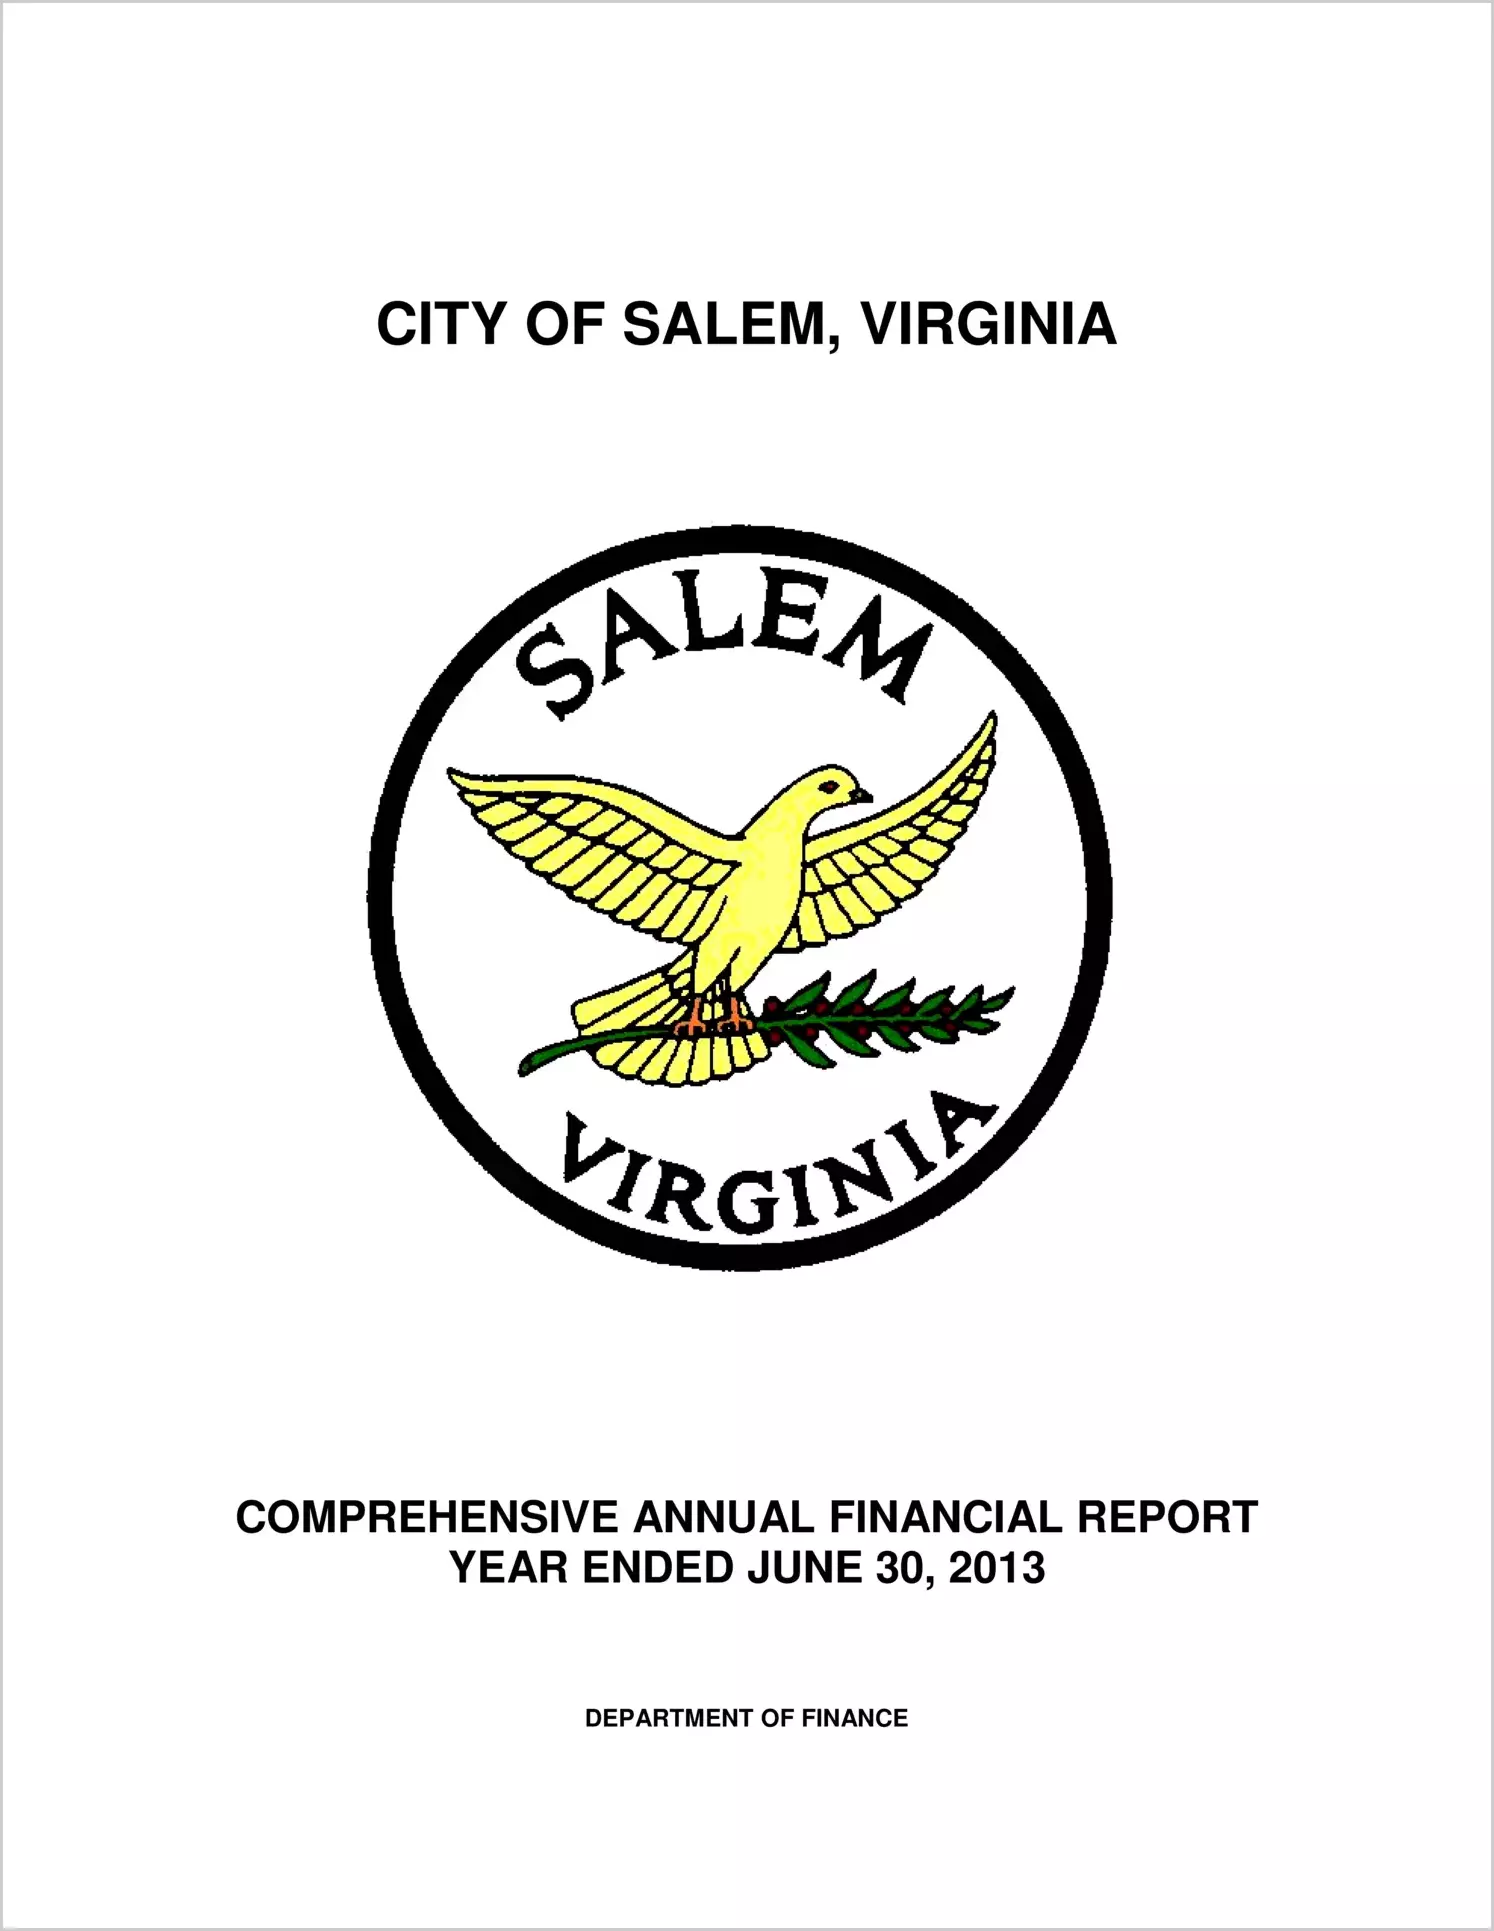 2013 Annual Financial Report for City of Salem